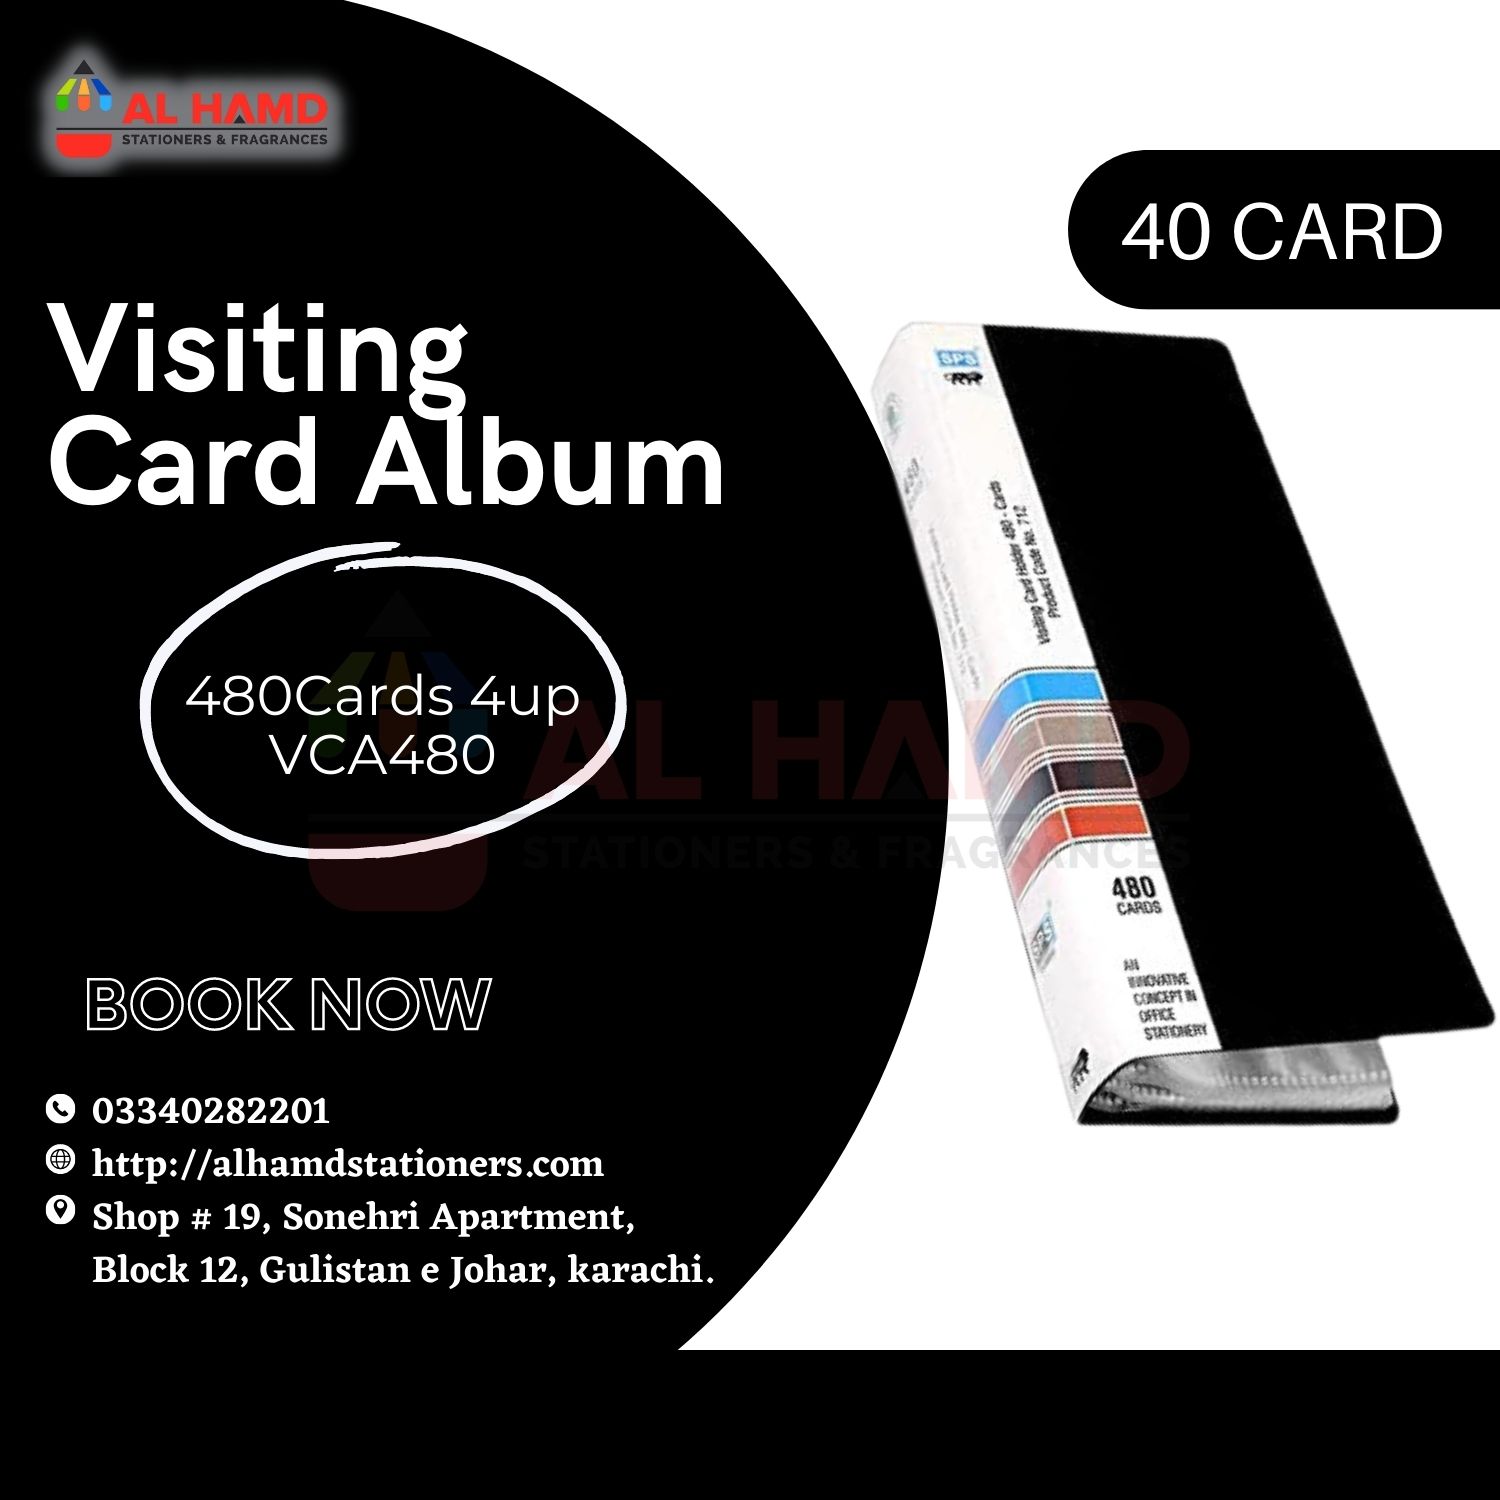 Visiting Card Album 480Cards 4up VCA480